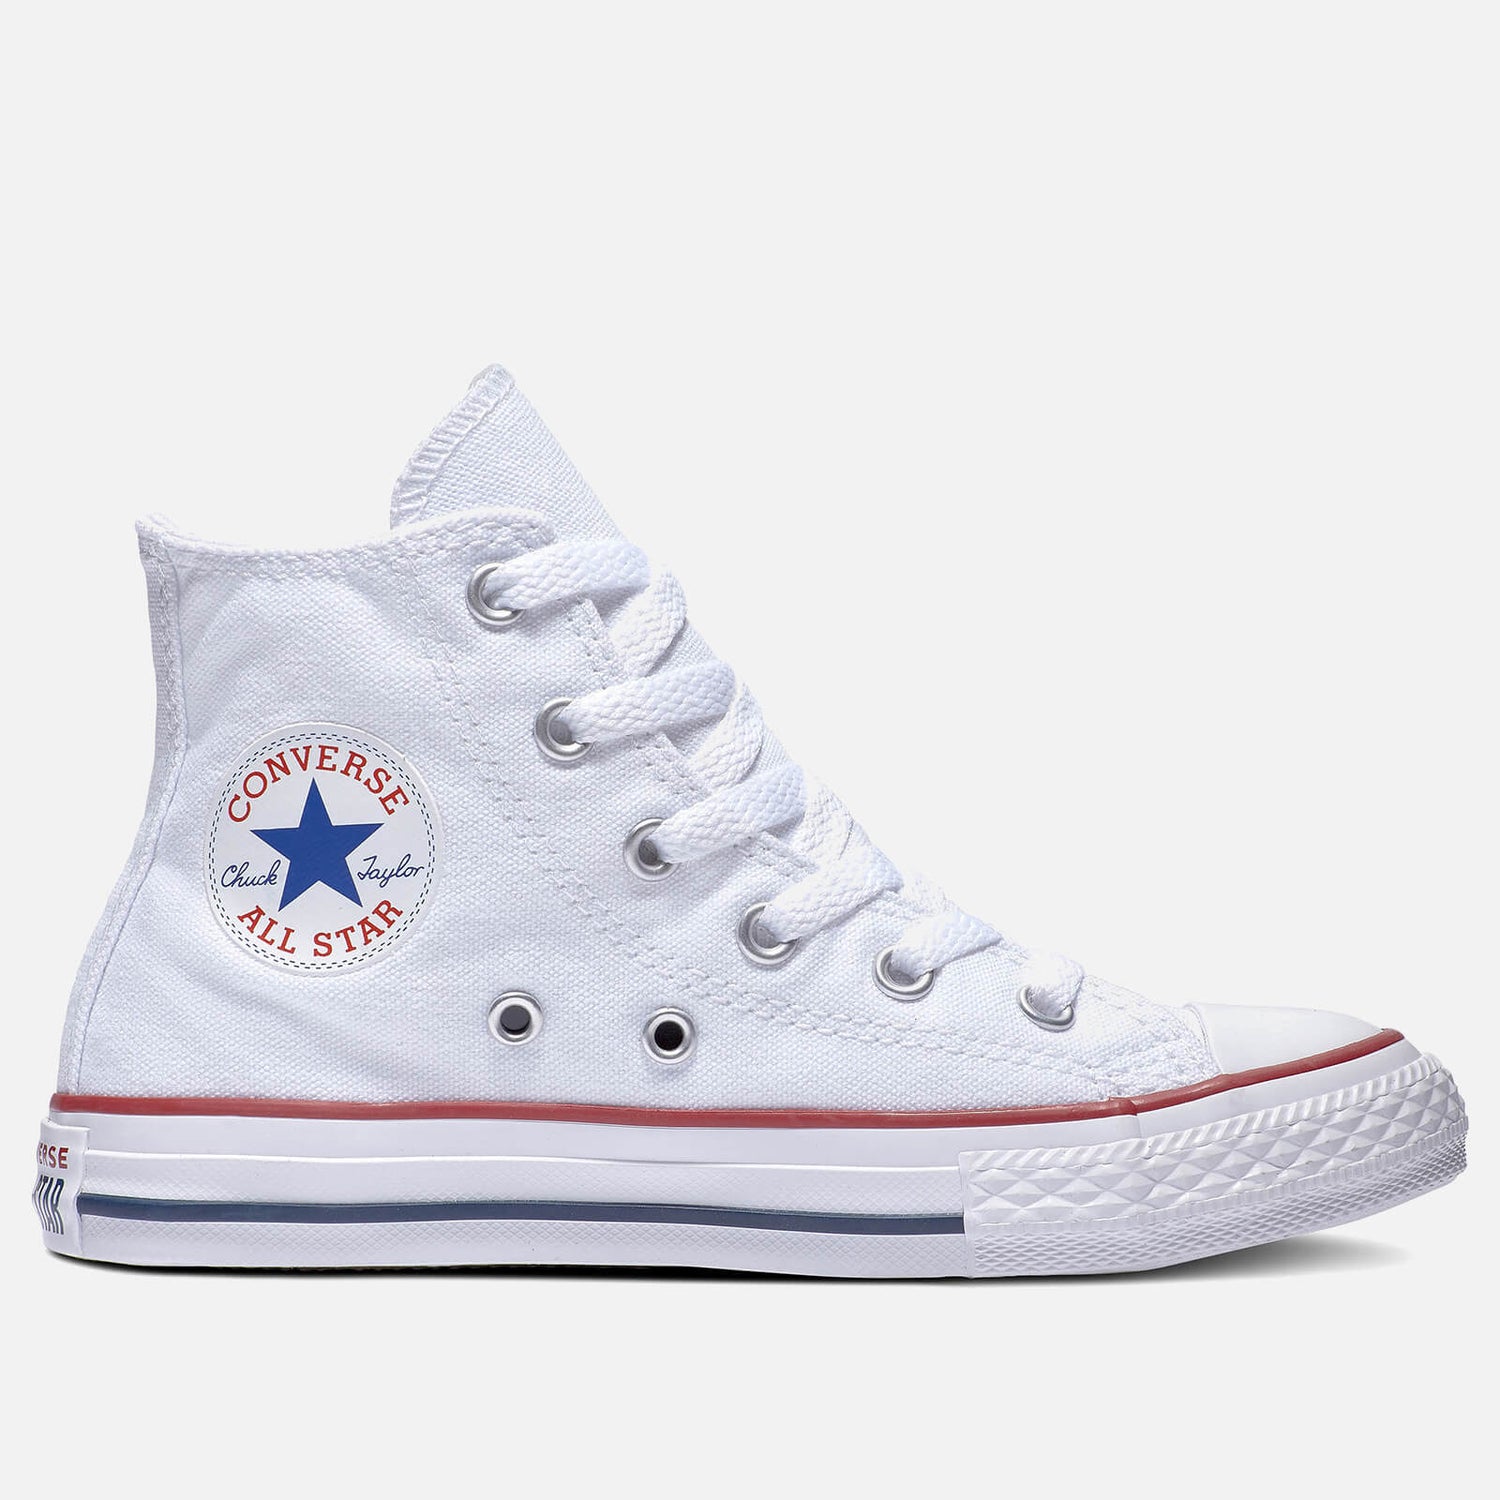 Converse Kid's Chuck Taylor All Star Hi - Top Tainers - Optical White